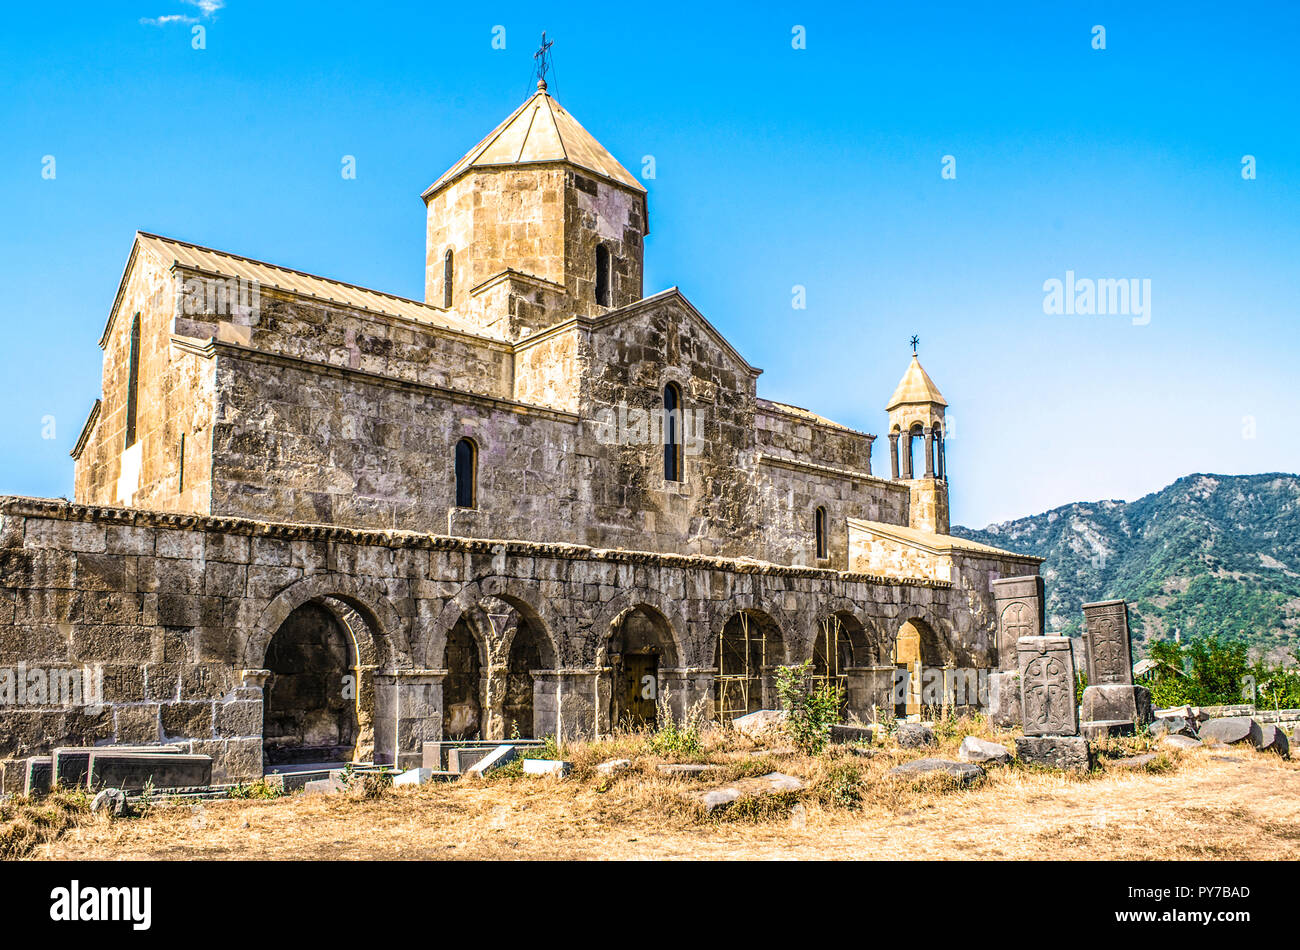 Odzun monastery on the south side  with views of the arched  gallery with the bell tower and stone crosses  in the background of forested mountains Stock Photo